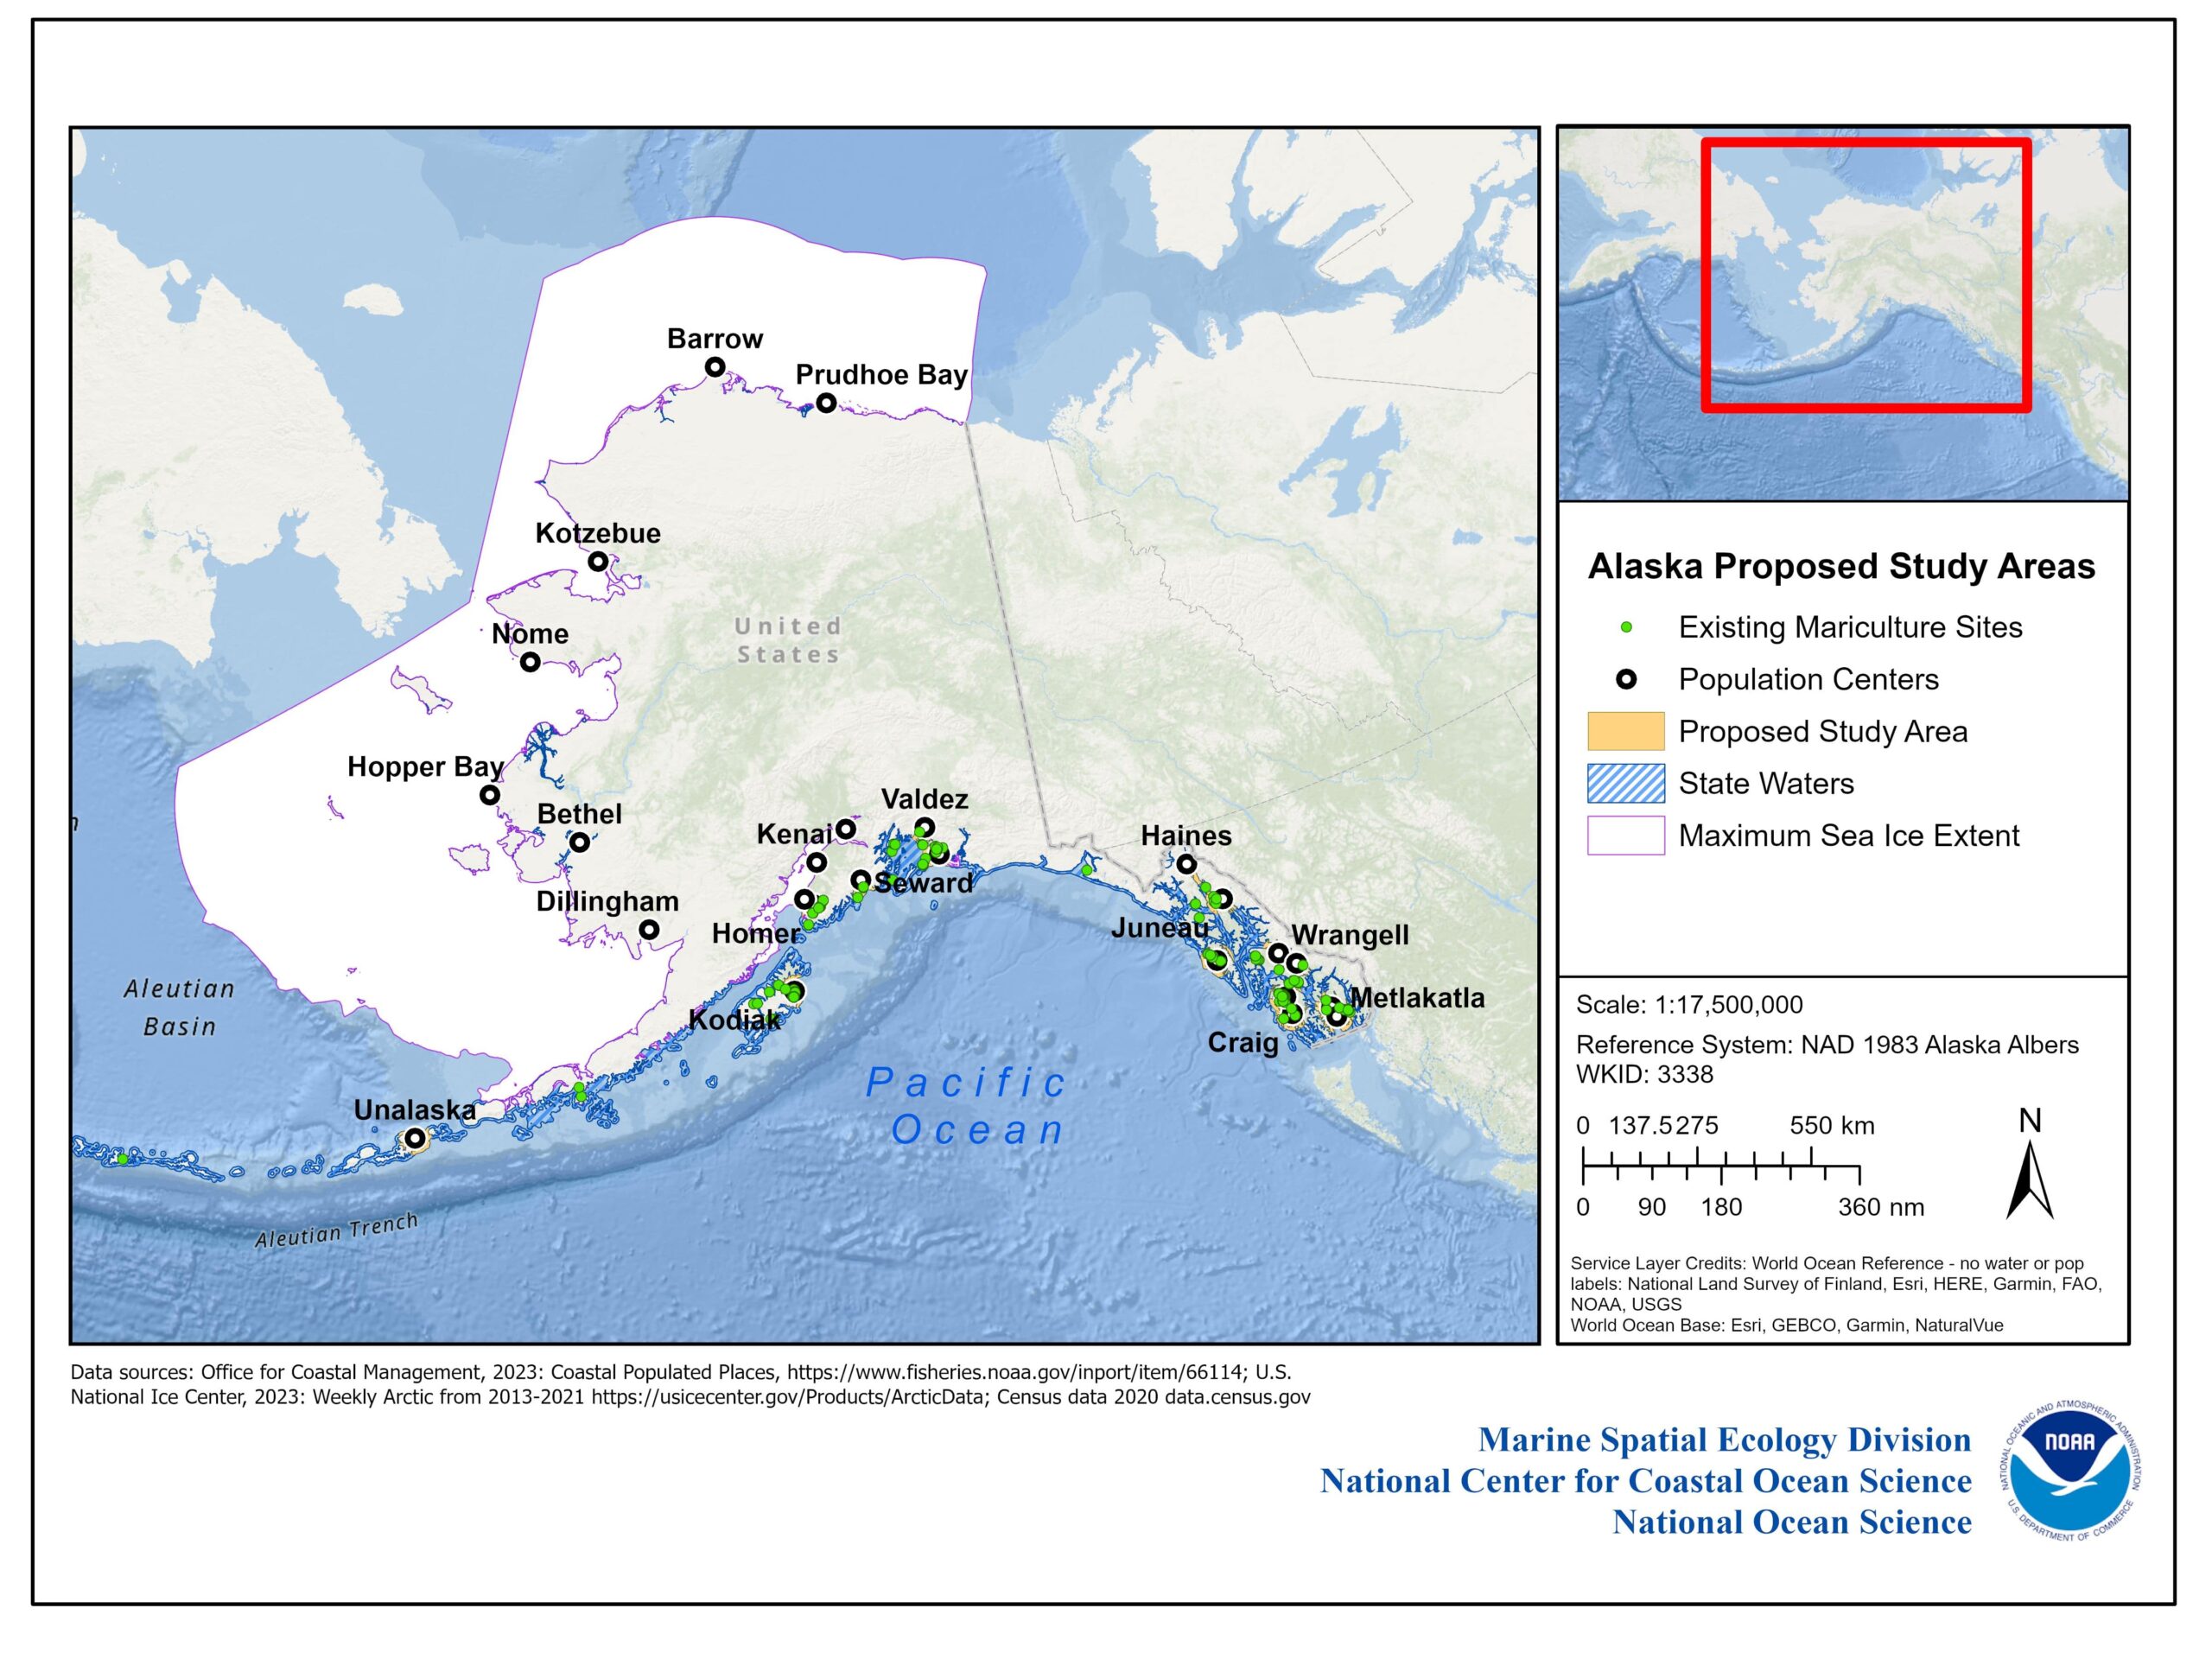 Request for Information: Identifying Aquaculture Opportunity Areas in Alaska